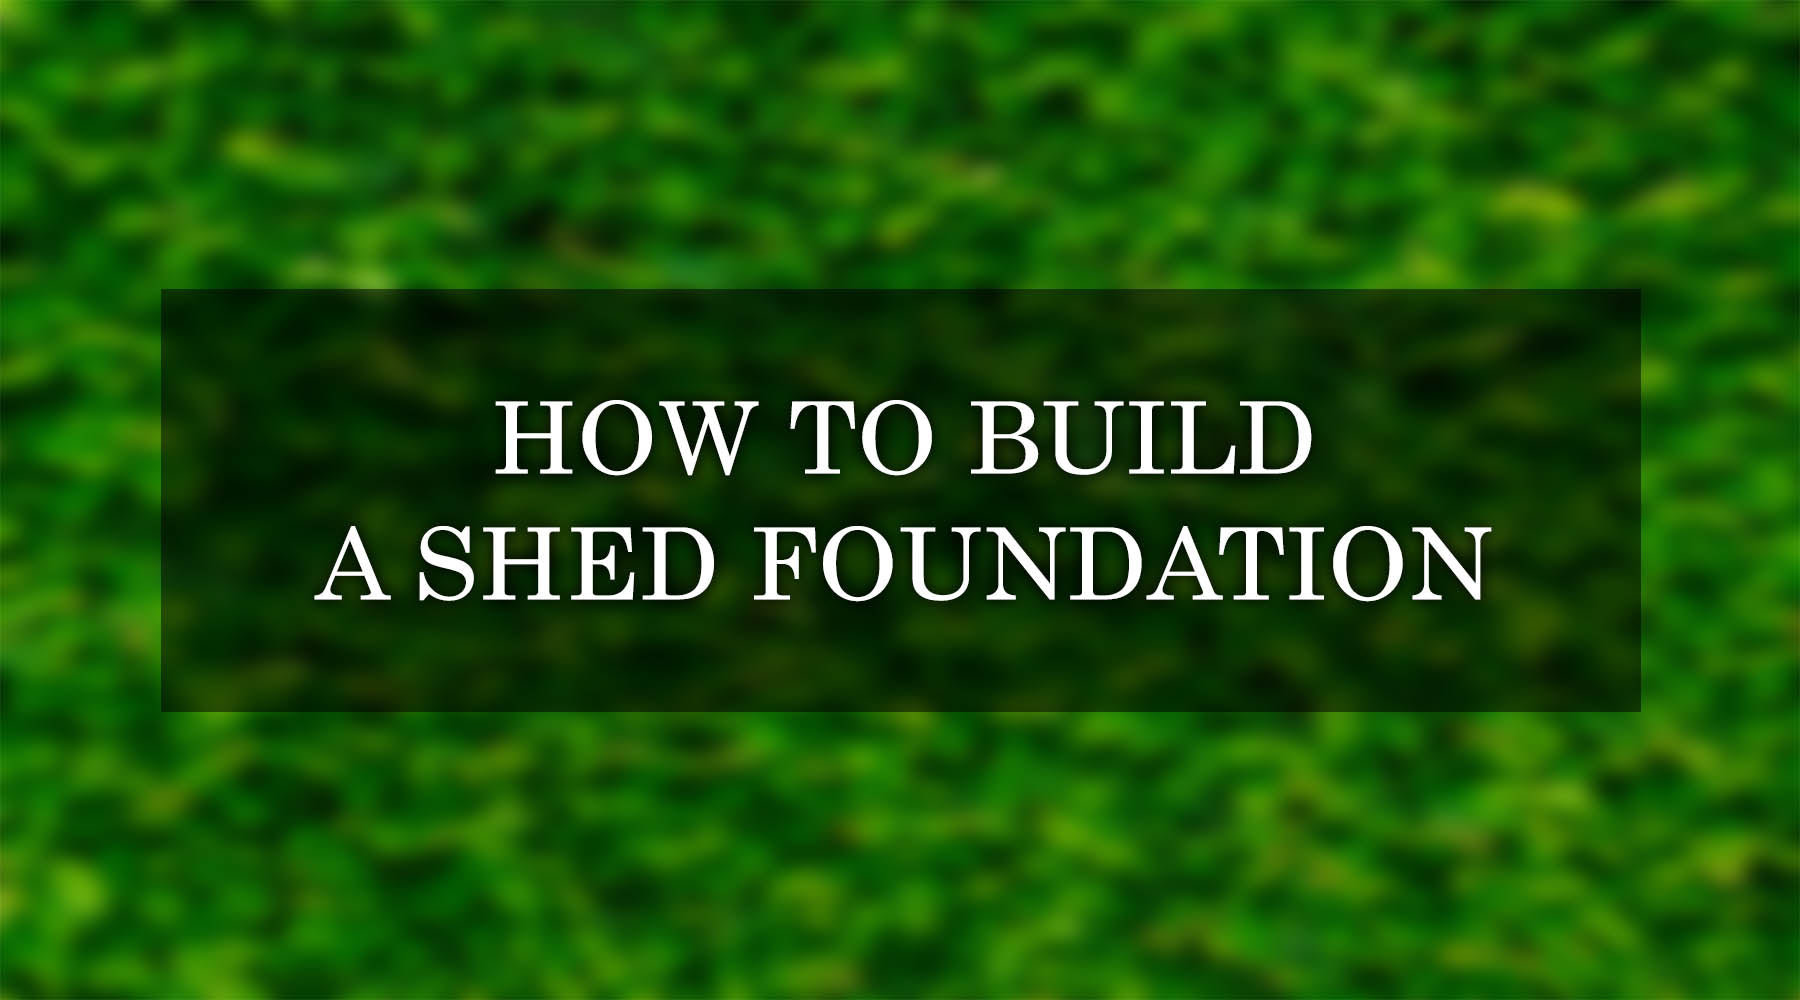 how to build the shed foundation